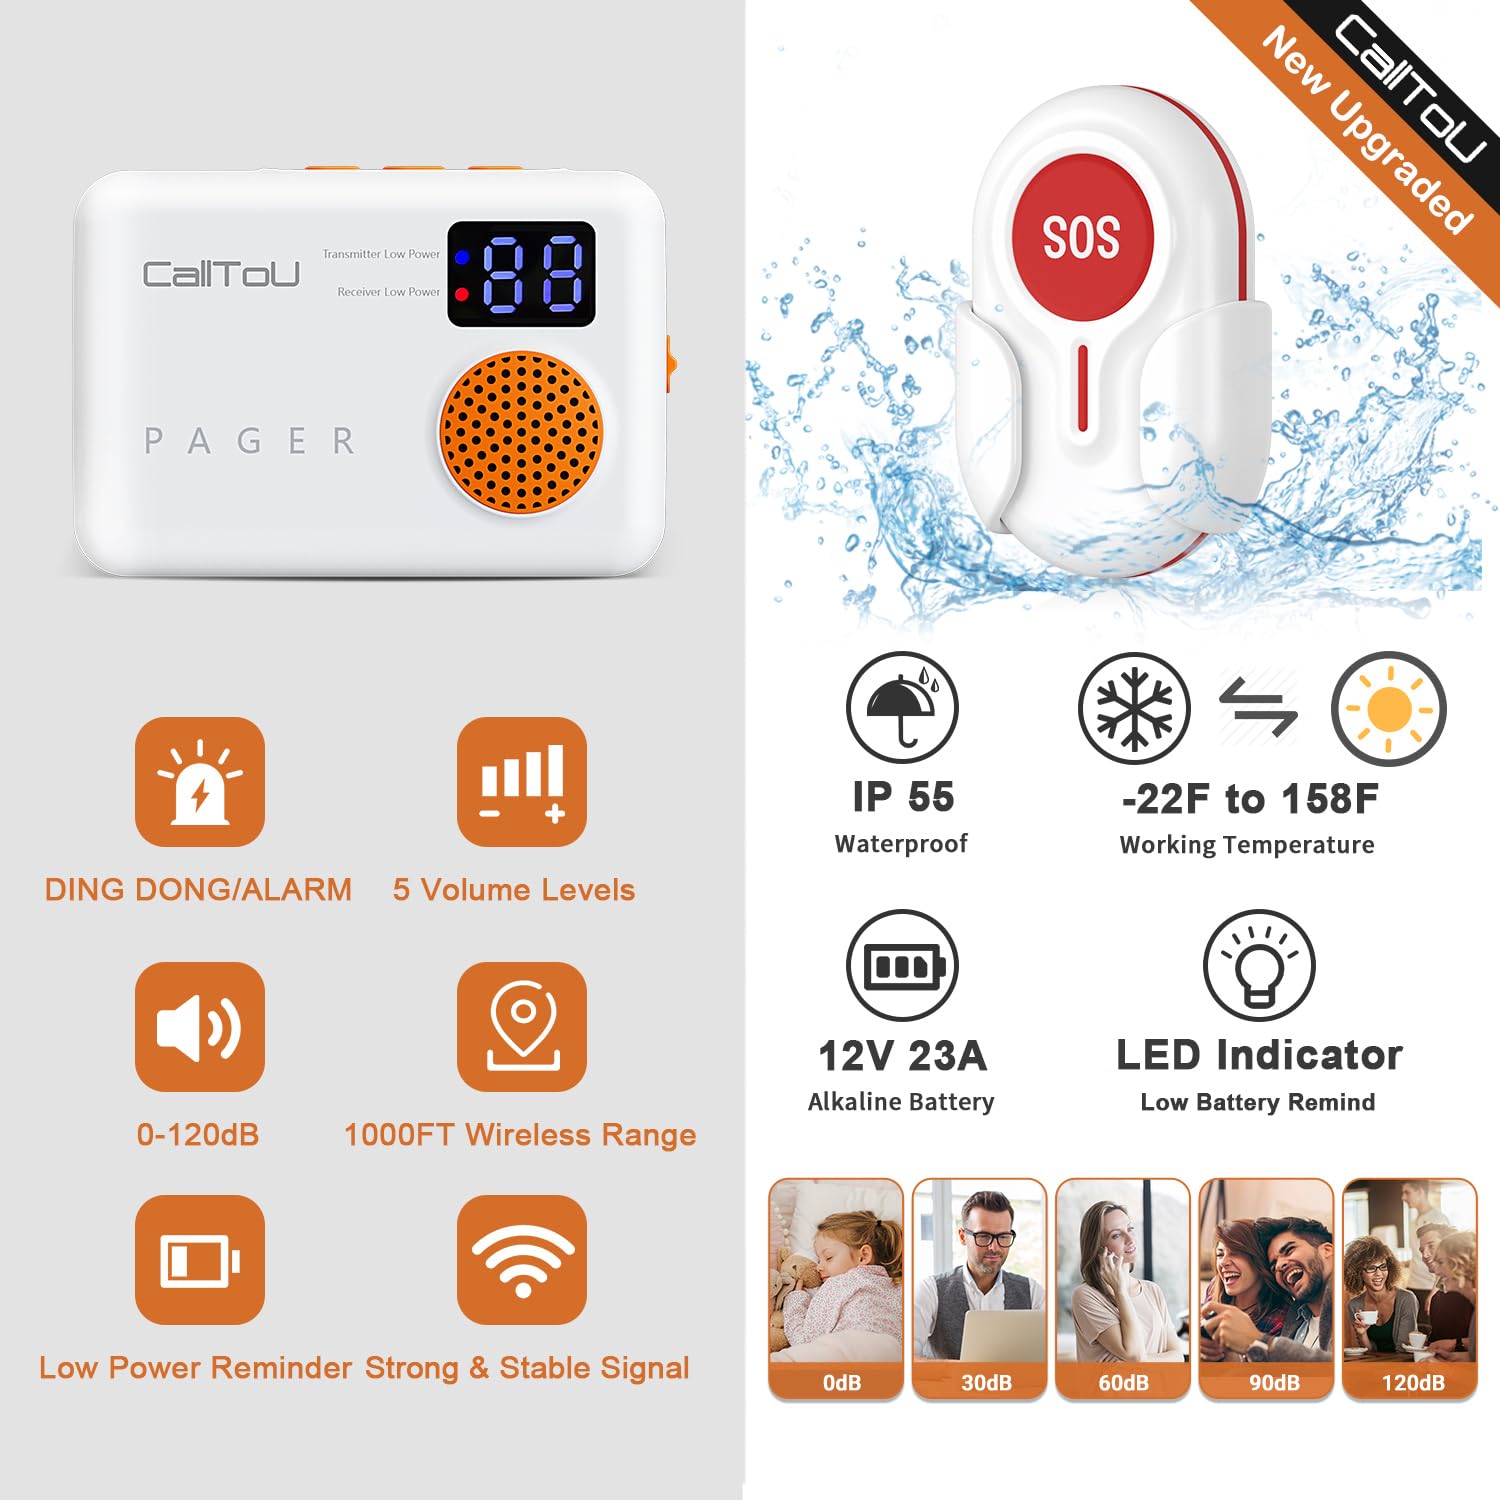 Wireless Caregiver Pager System with Vibration Alert - 1000FT Range for Home, Elderly, Patients, and Disabled - Includes 1 Battery Receiver, 1 Call Button, and Digital Display with Low Power Reminder